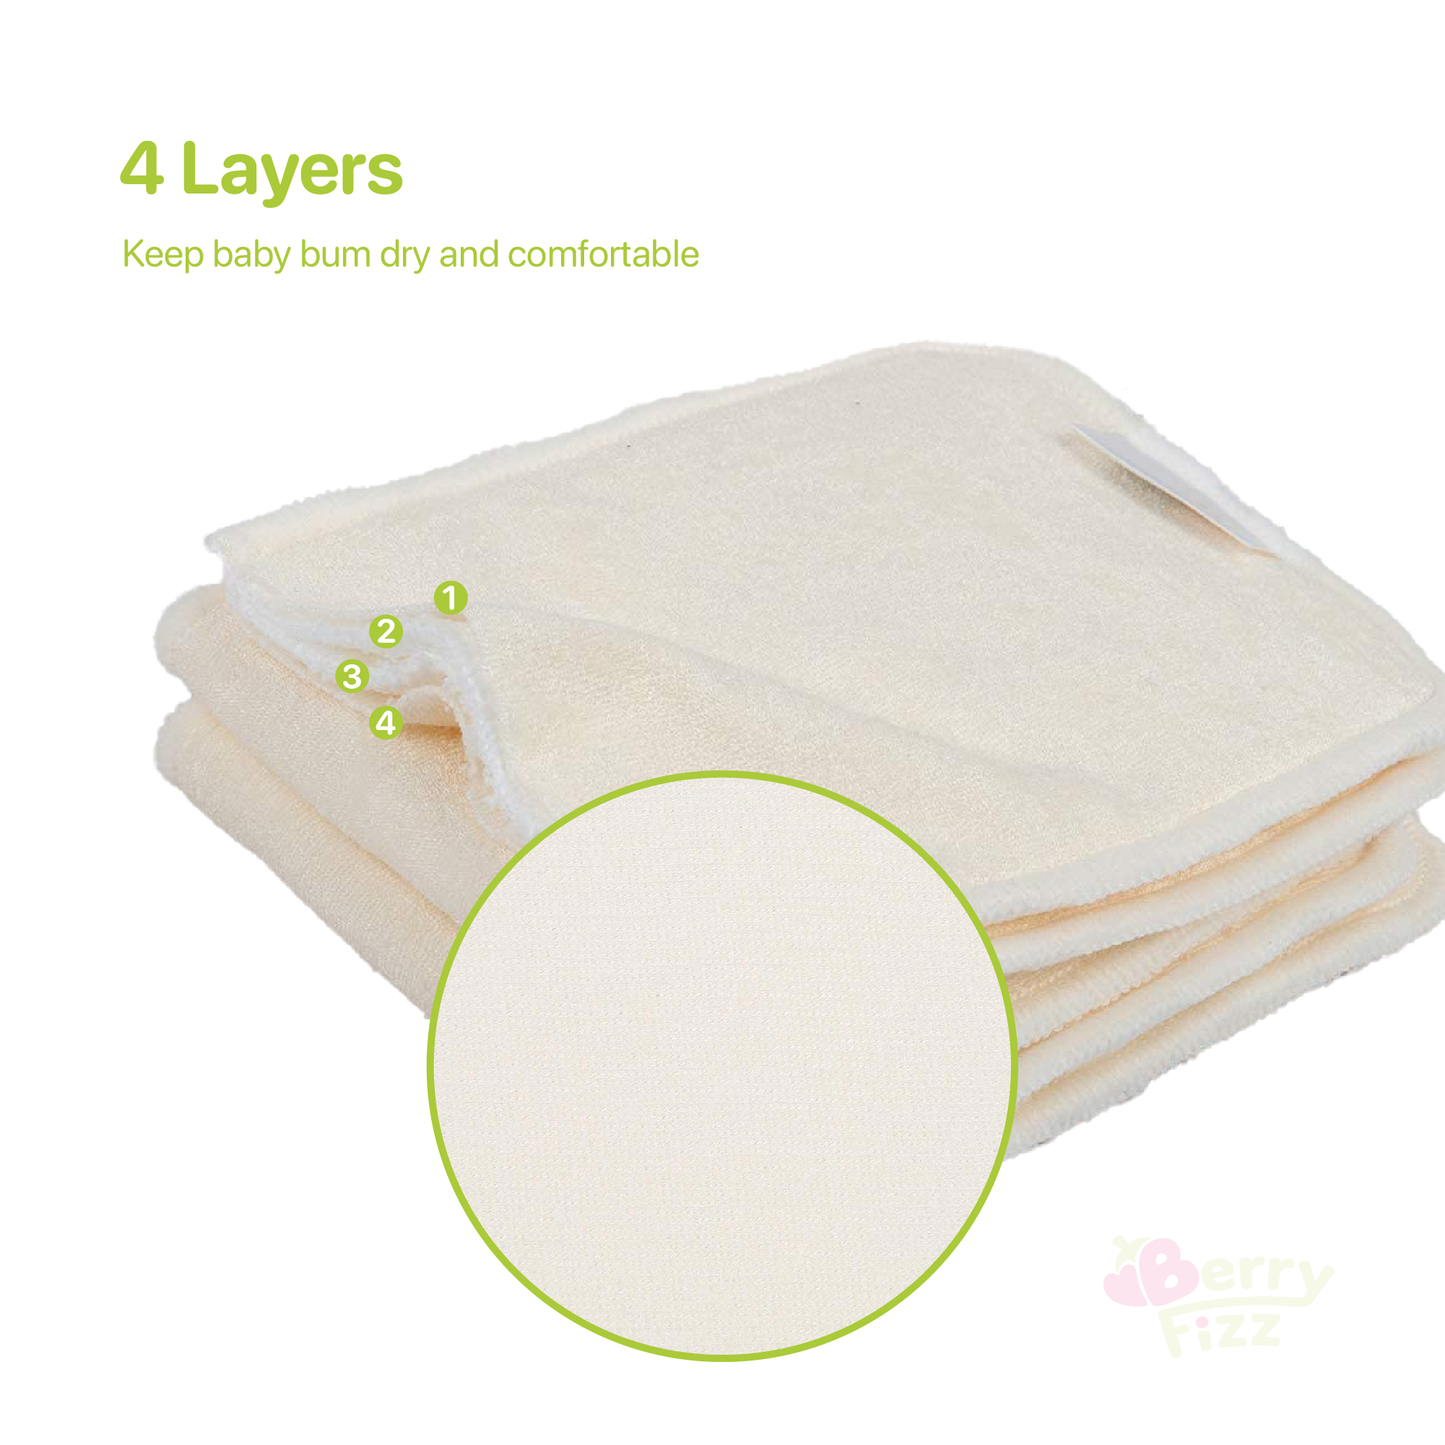 10 Pack Cloth Baby Diaper Inserts Liner 3 Layers Hemp Cotton Reusable Super Absorbent for Newborn